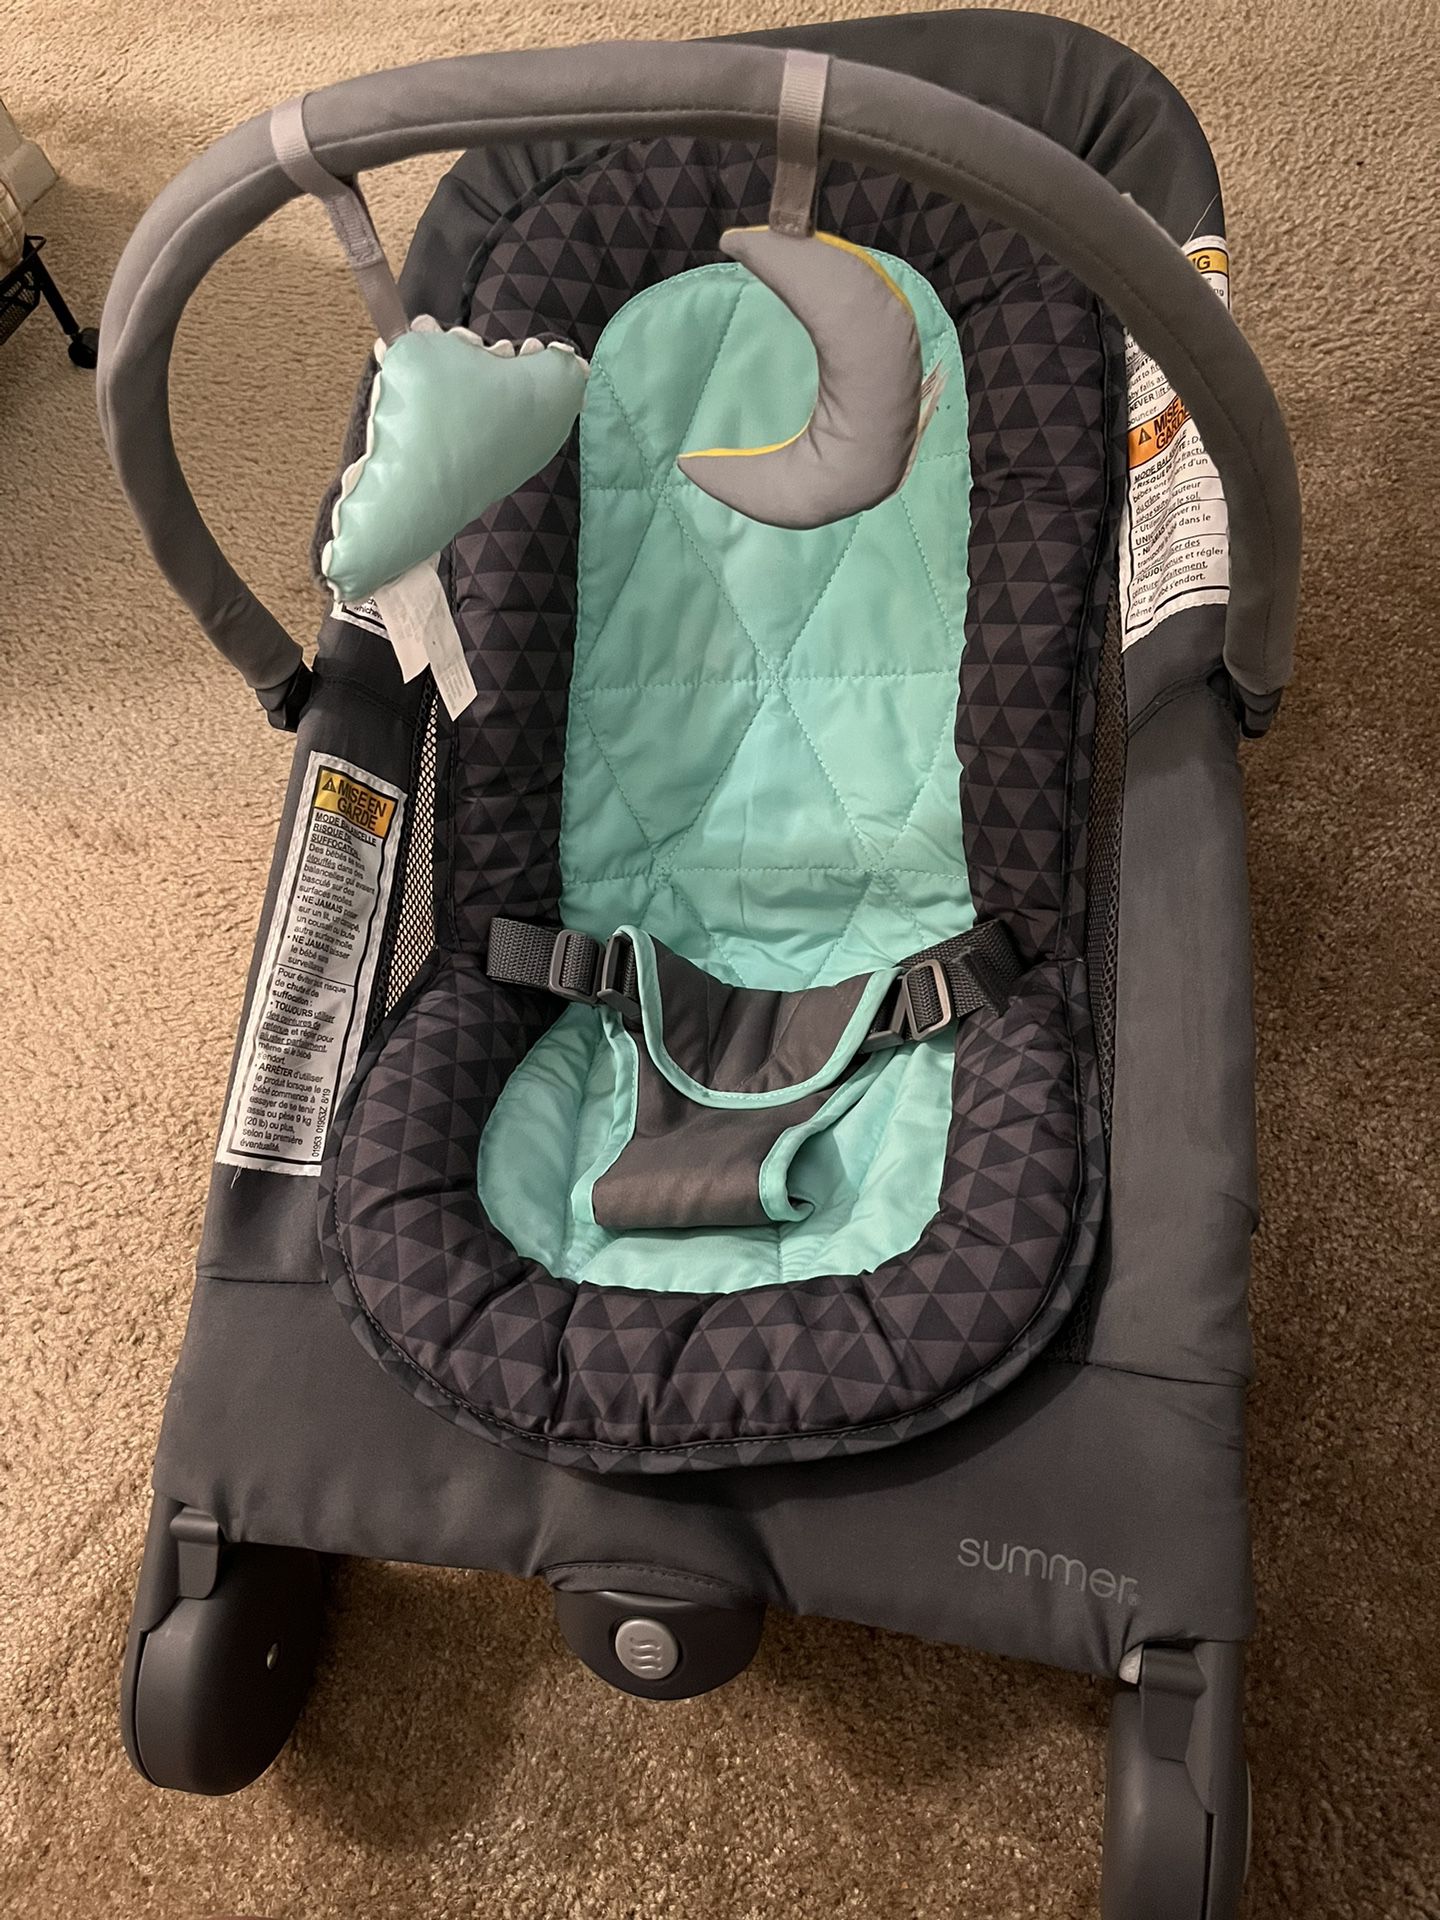 baby bouncer like new $10